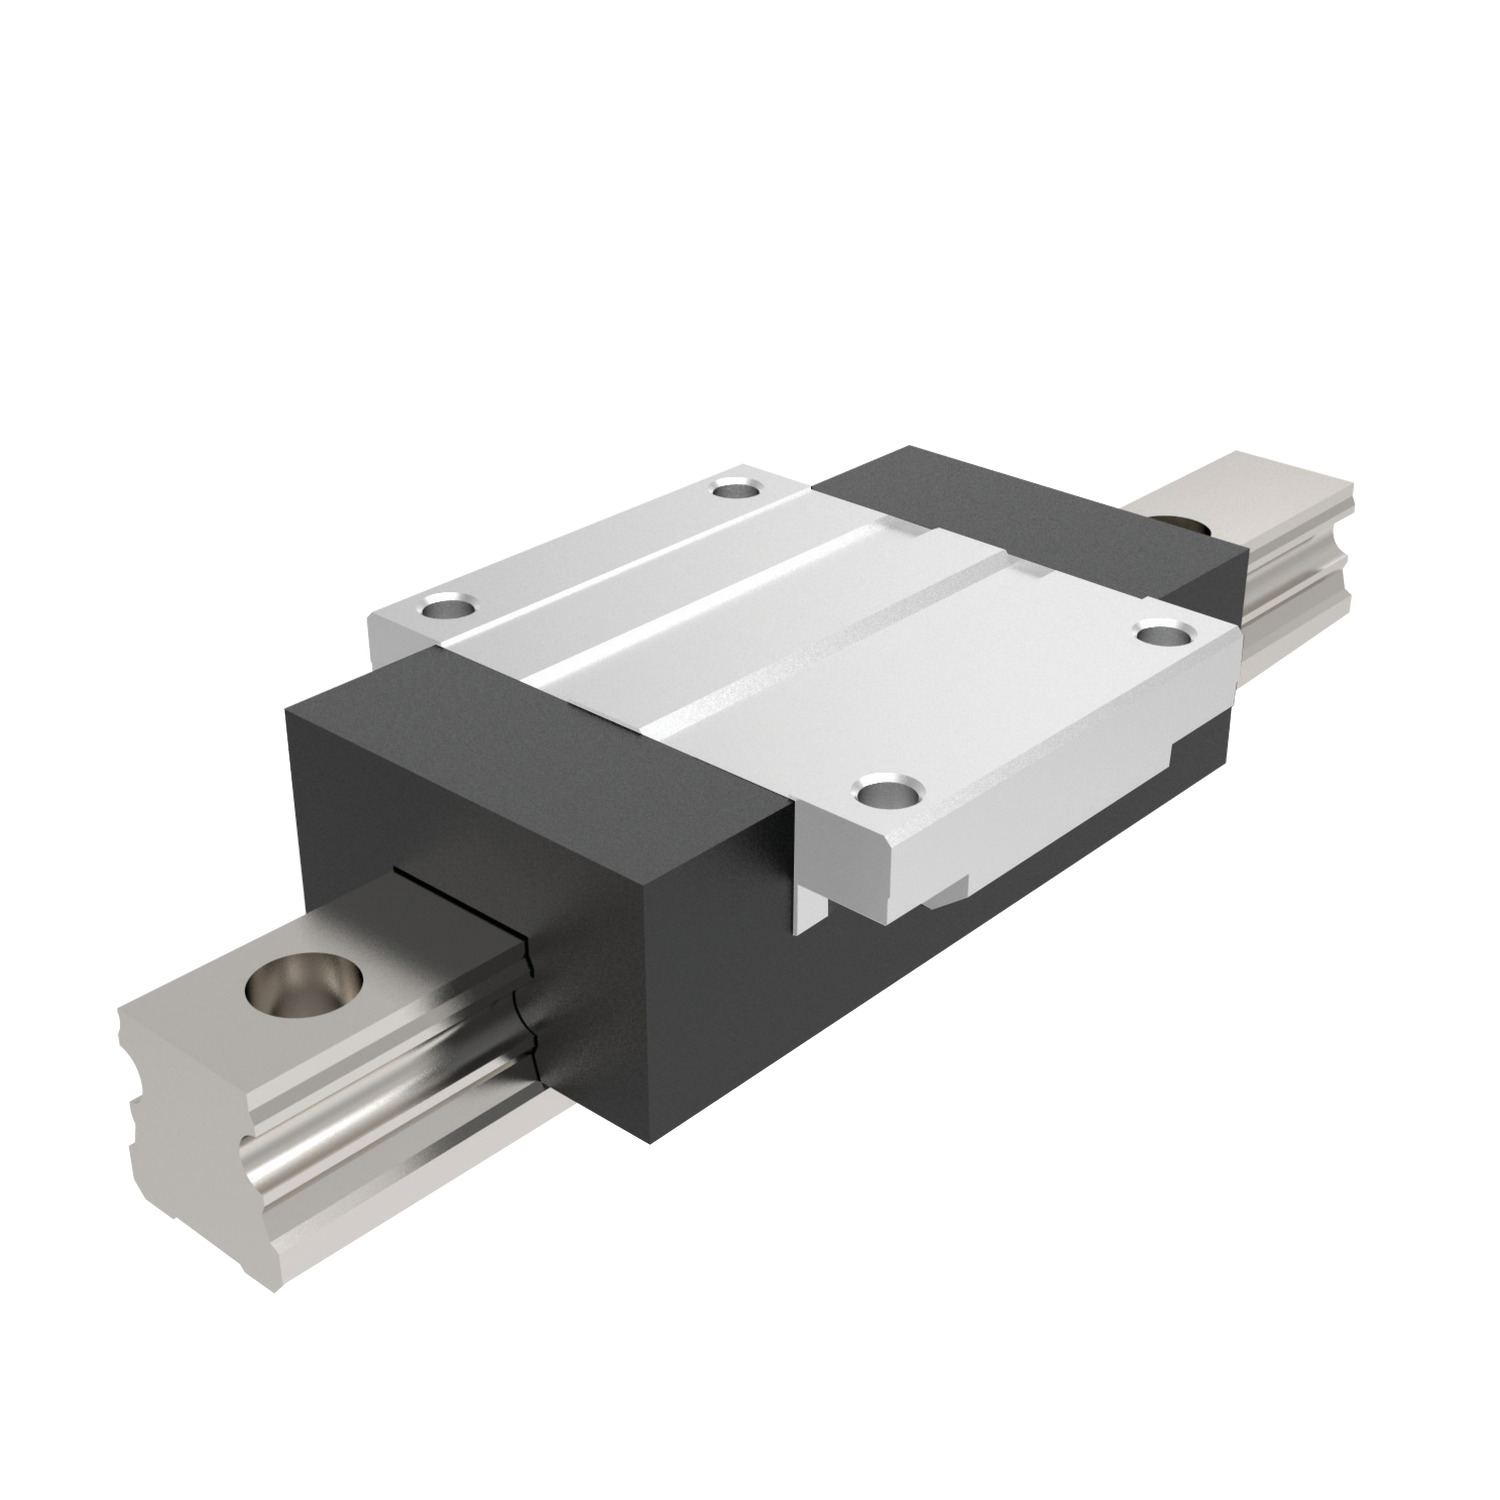 Flanged Aluminium Carriages Flanged carriages for aluminium linear guideways.  Ideal for applications where weight efficiency is a priority, such as for aviation parts.